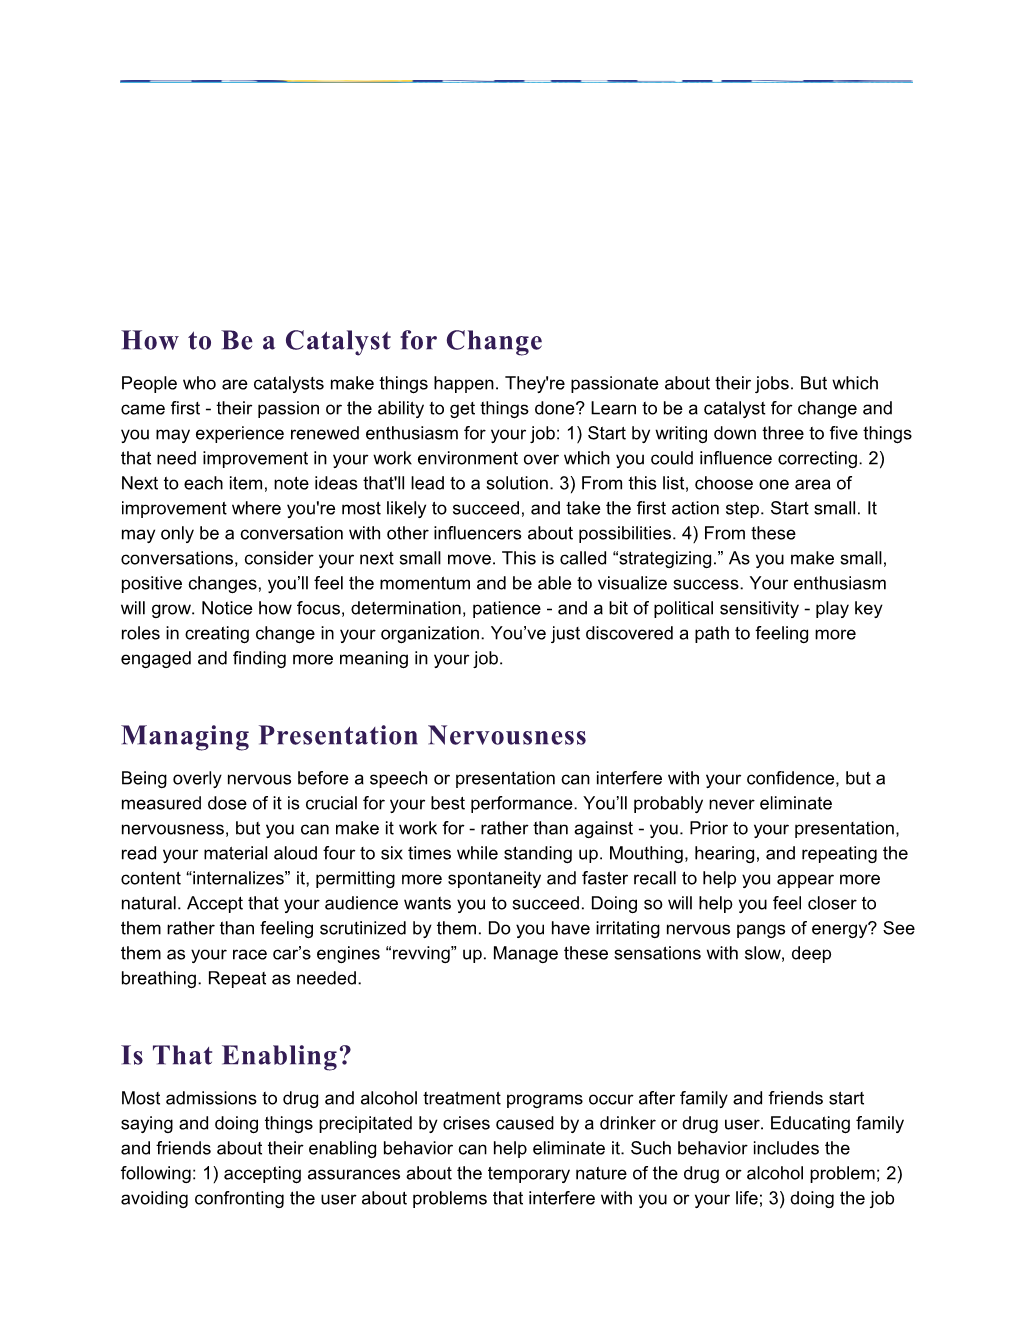 How to Be a Catalyst for Change